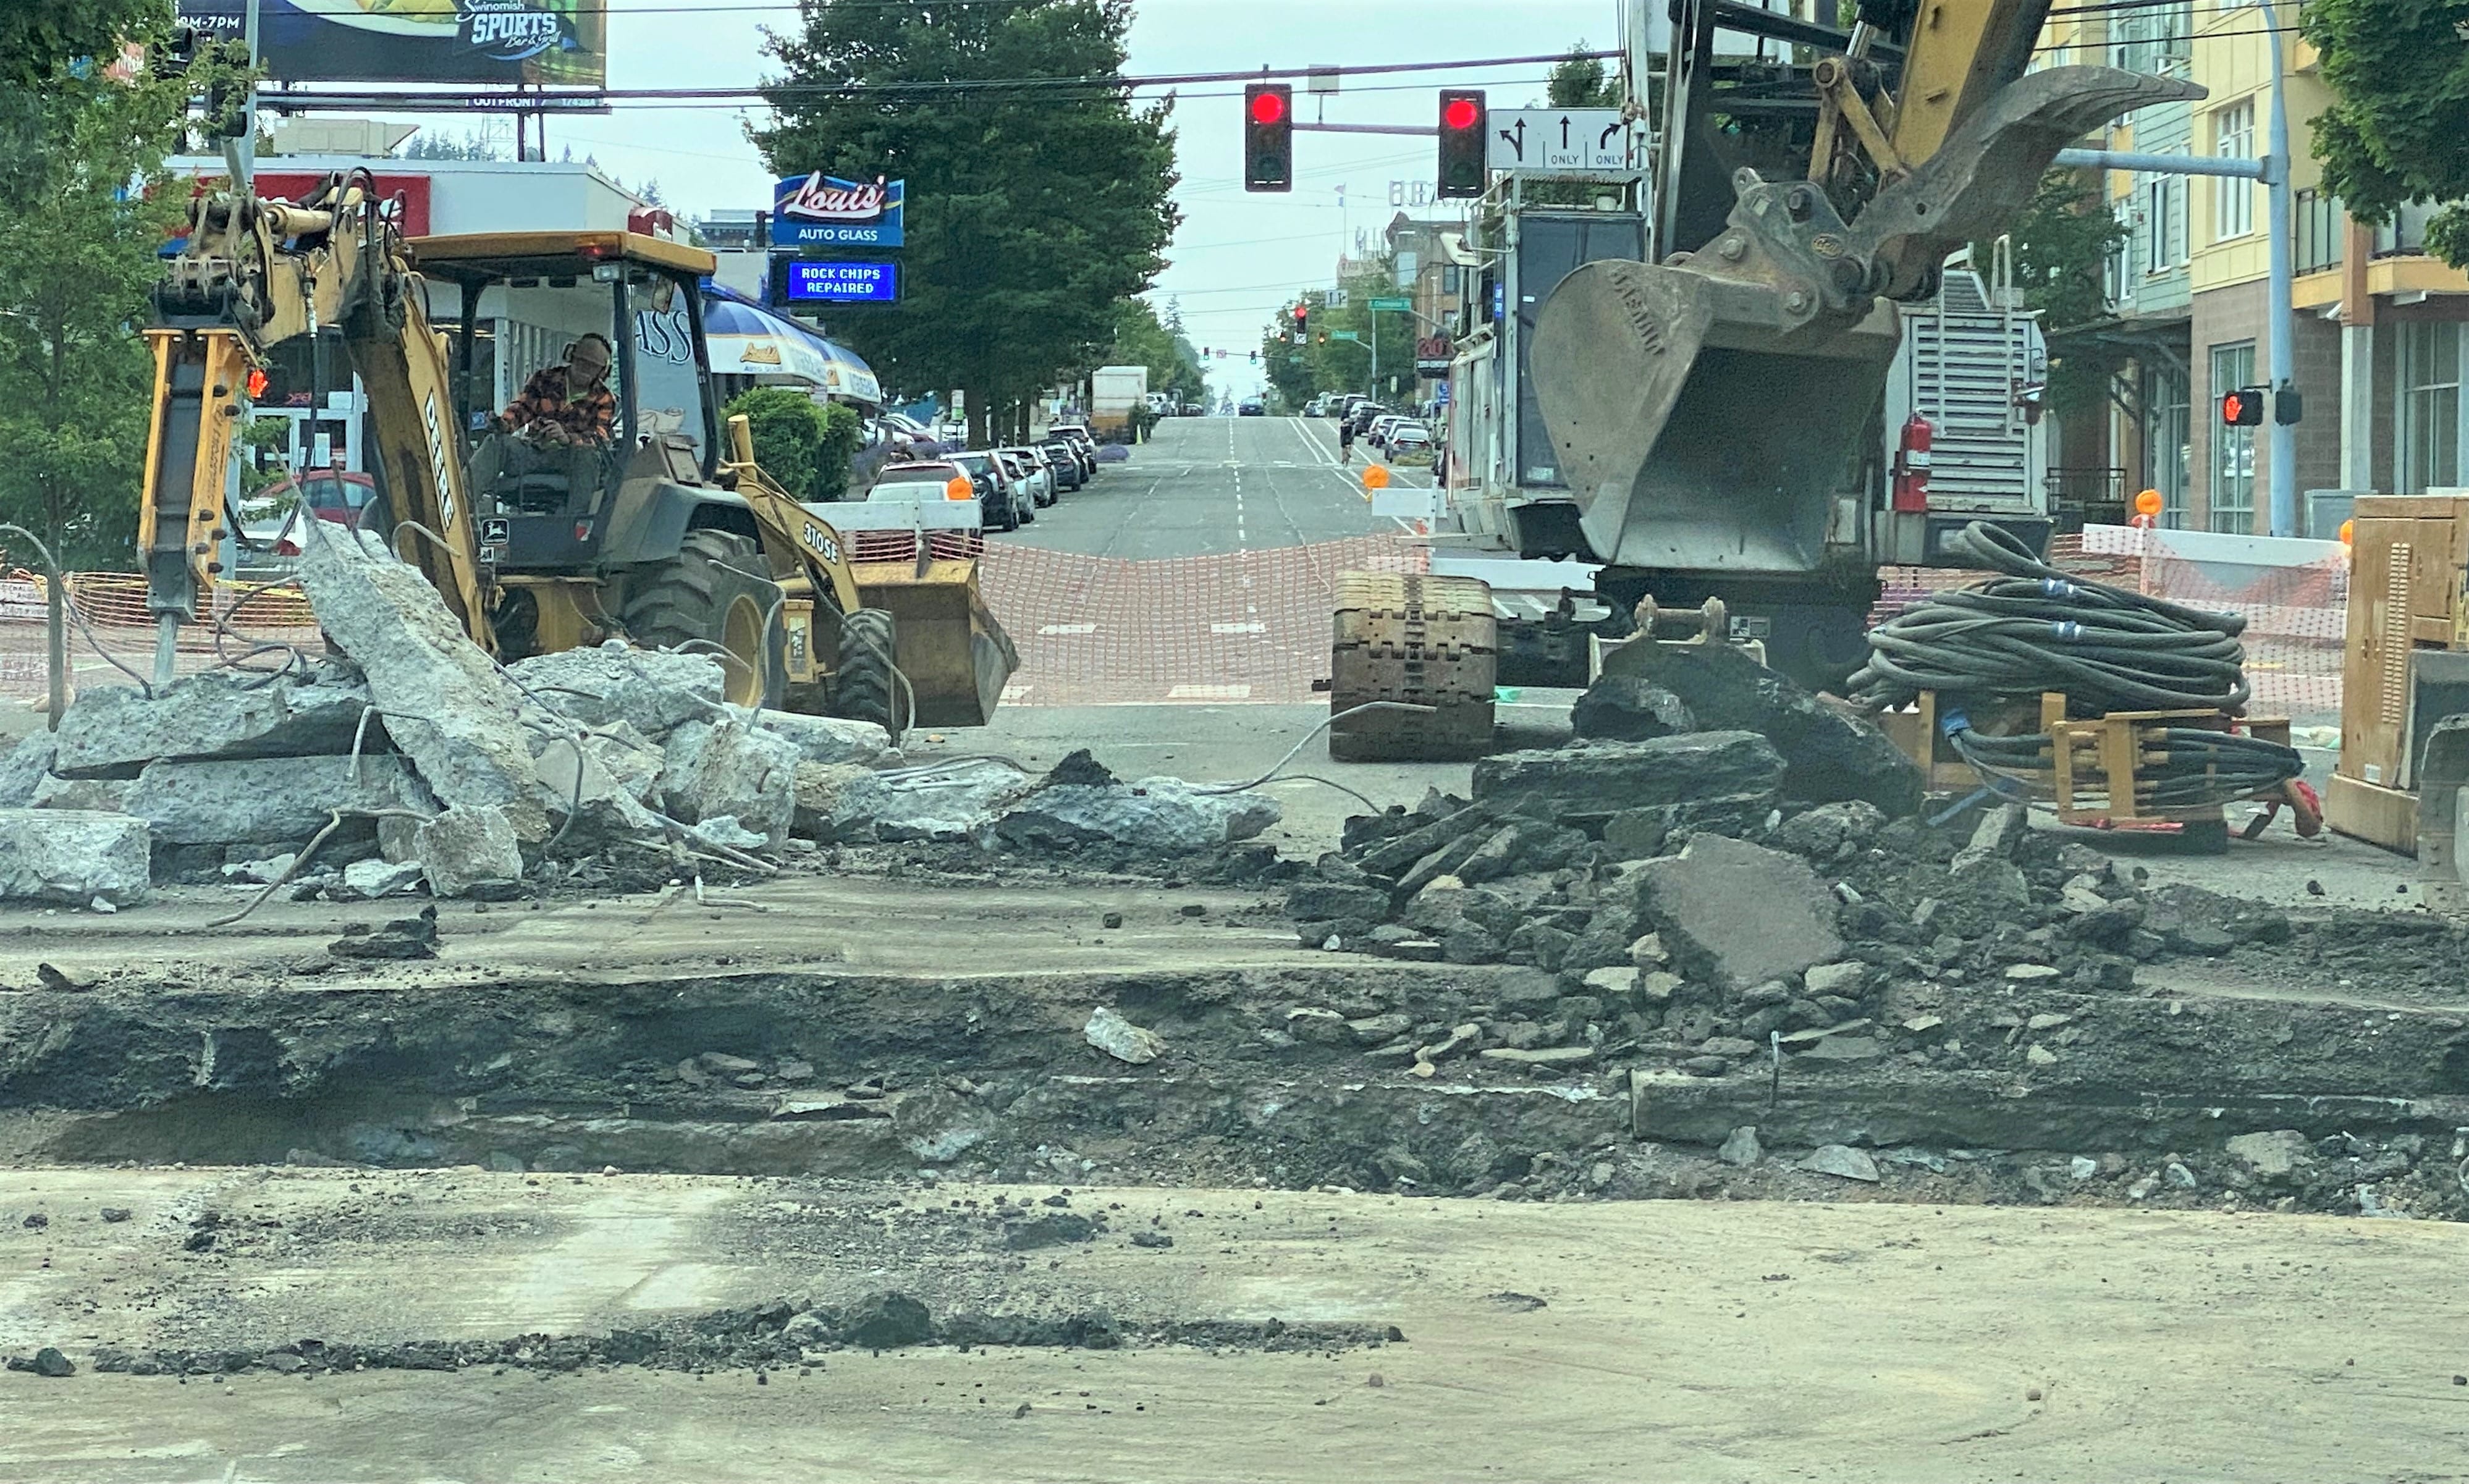 Deconstruction at State and Ellis intersection to access and replace wooden supports